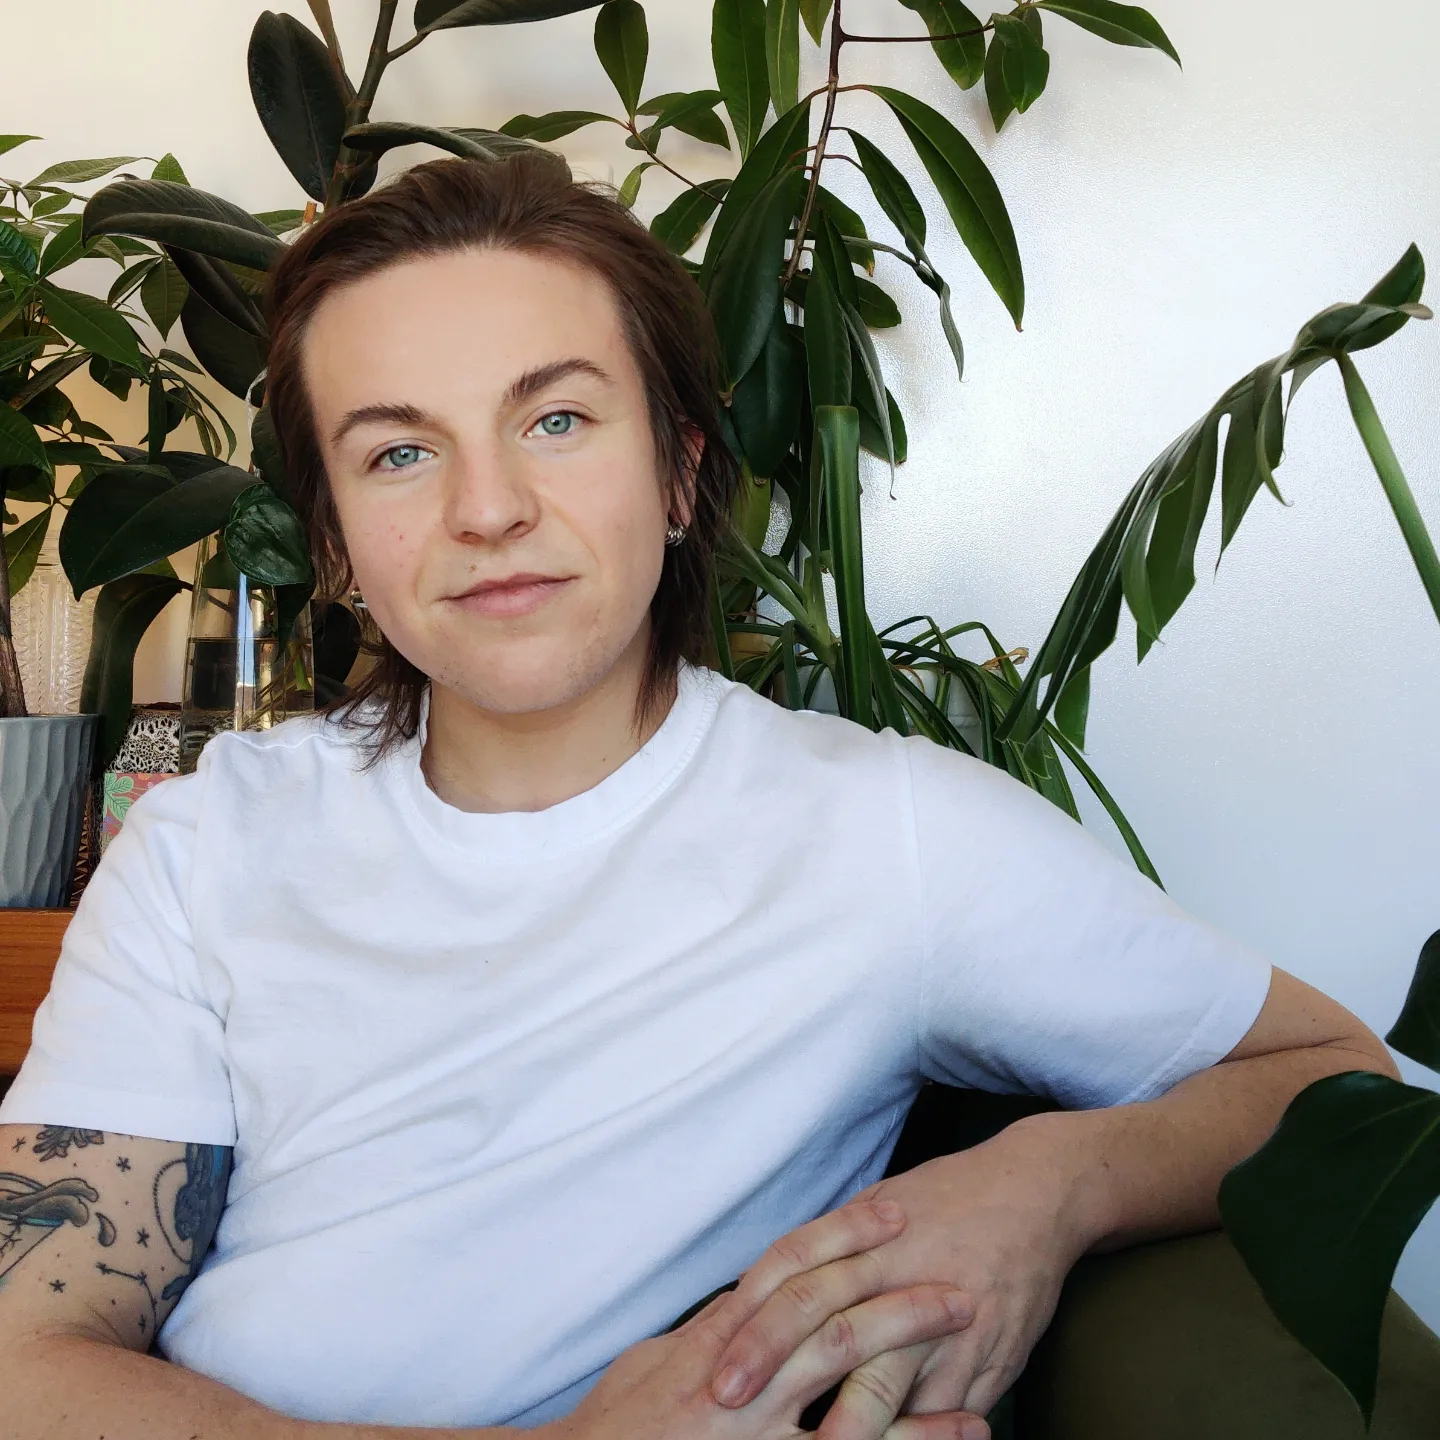 Kit is a white masculine person with shoulder-length brown hair. They are wearing a white t-shirt and are sitting with their hands folded in front of them, looking into the camera.